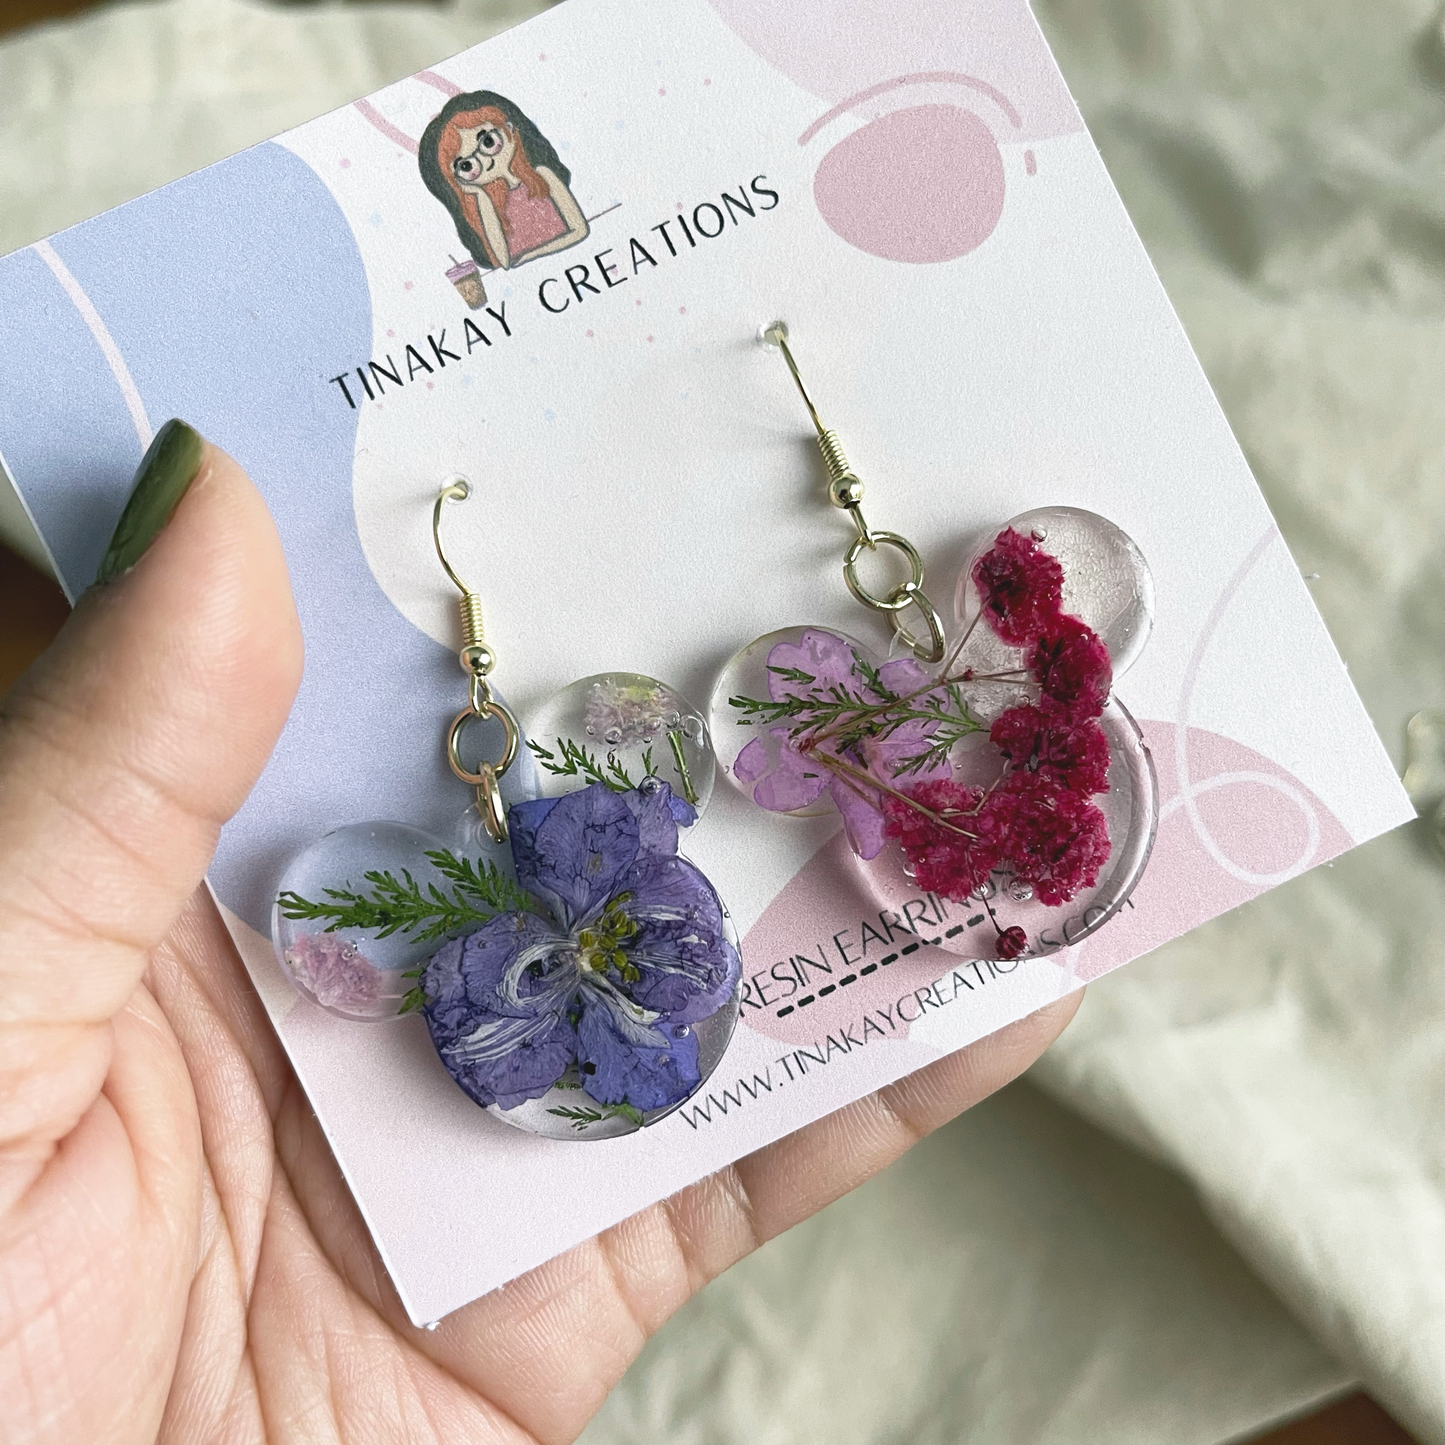 Floral Clear Resin Mickey Dangle Earrings 2.5" - TinakayCreations